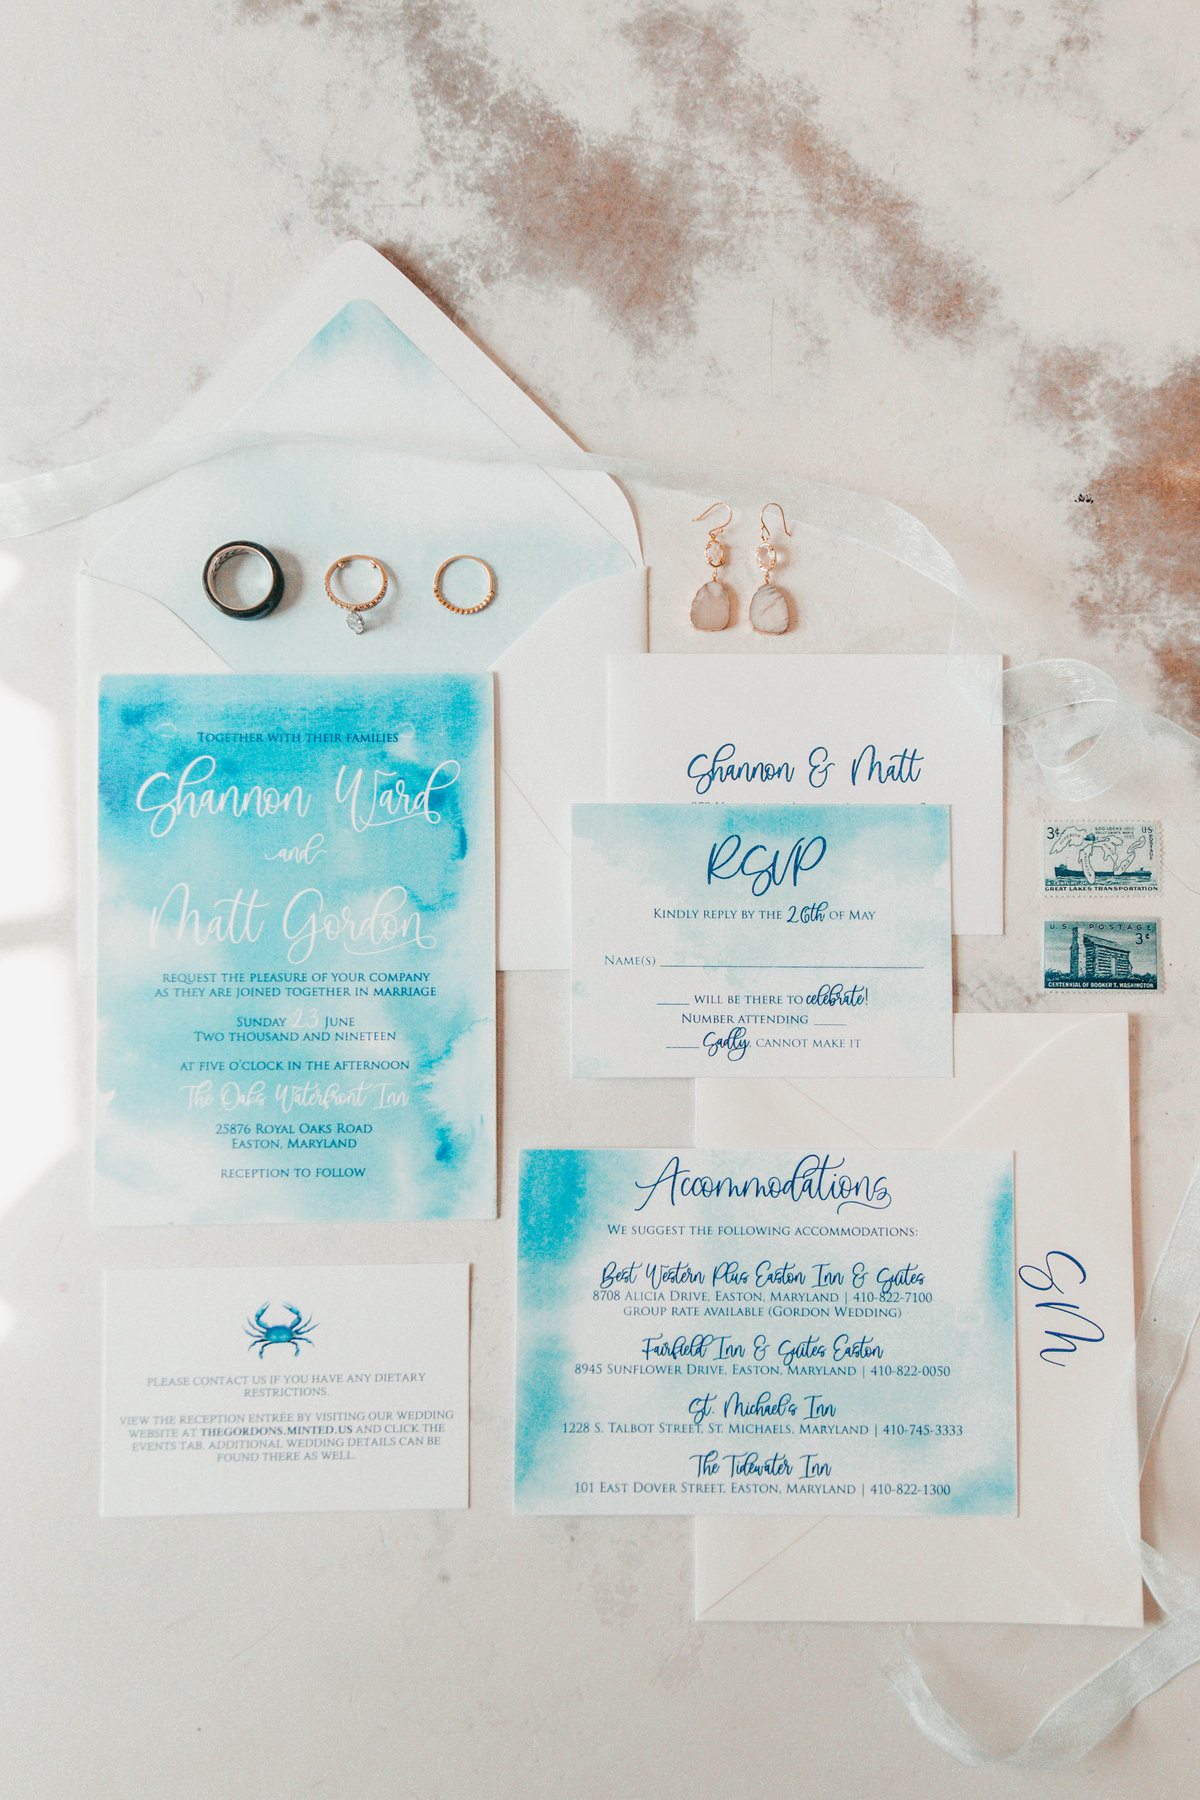 A wedding flatlay of details, including the wedding invitations, rings, and earrings